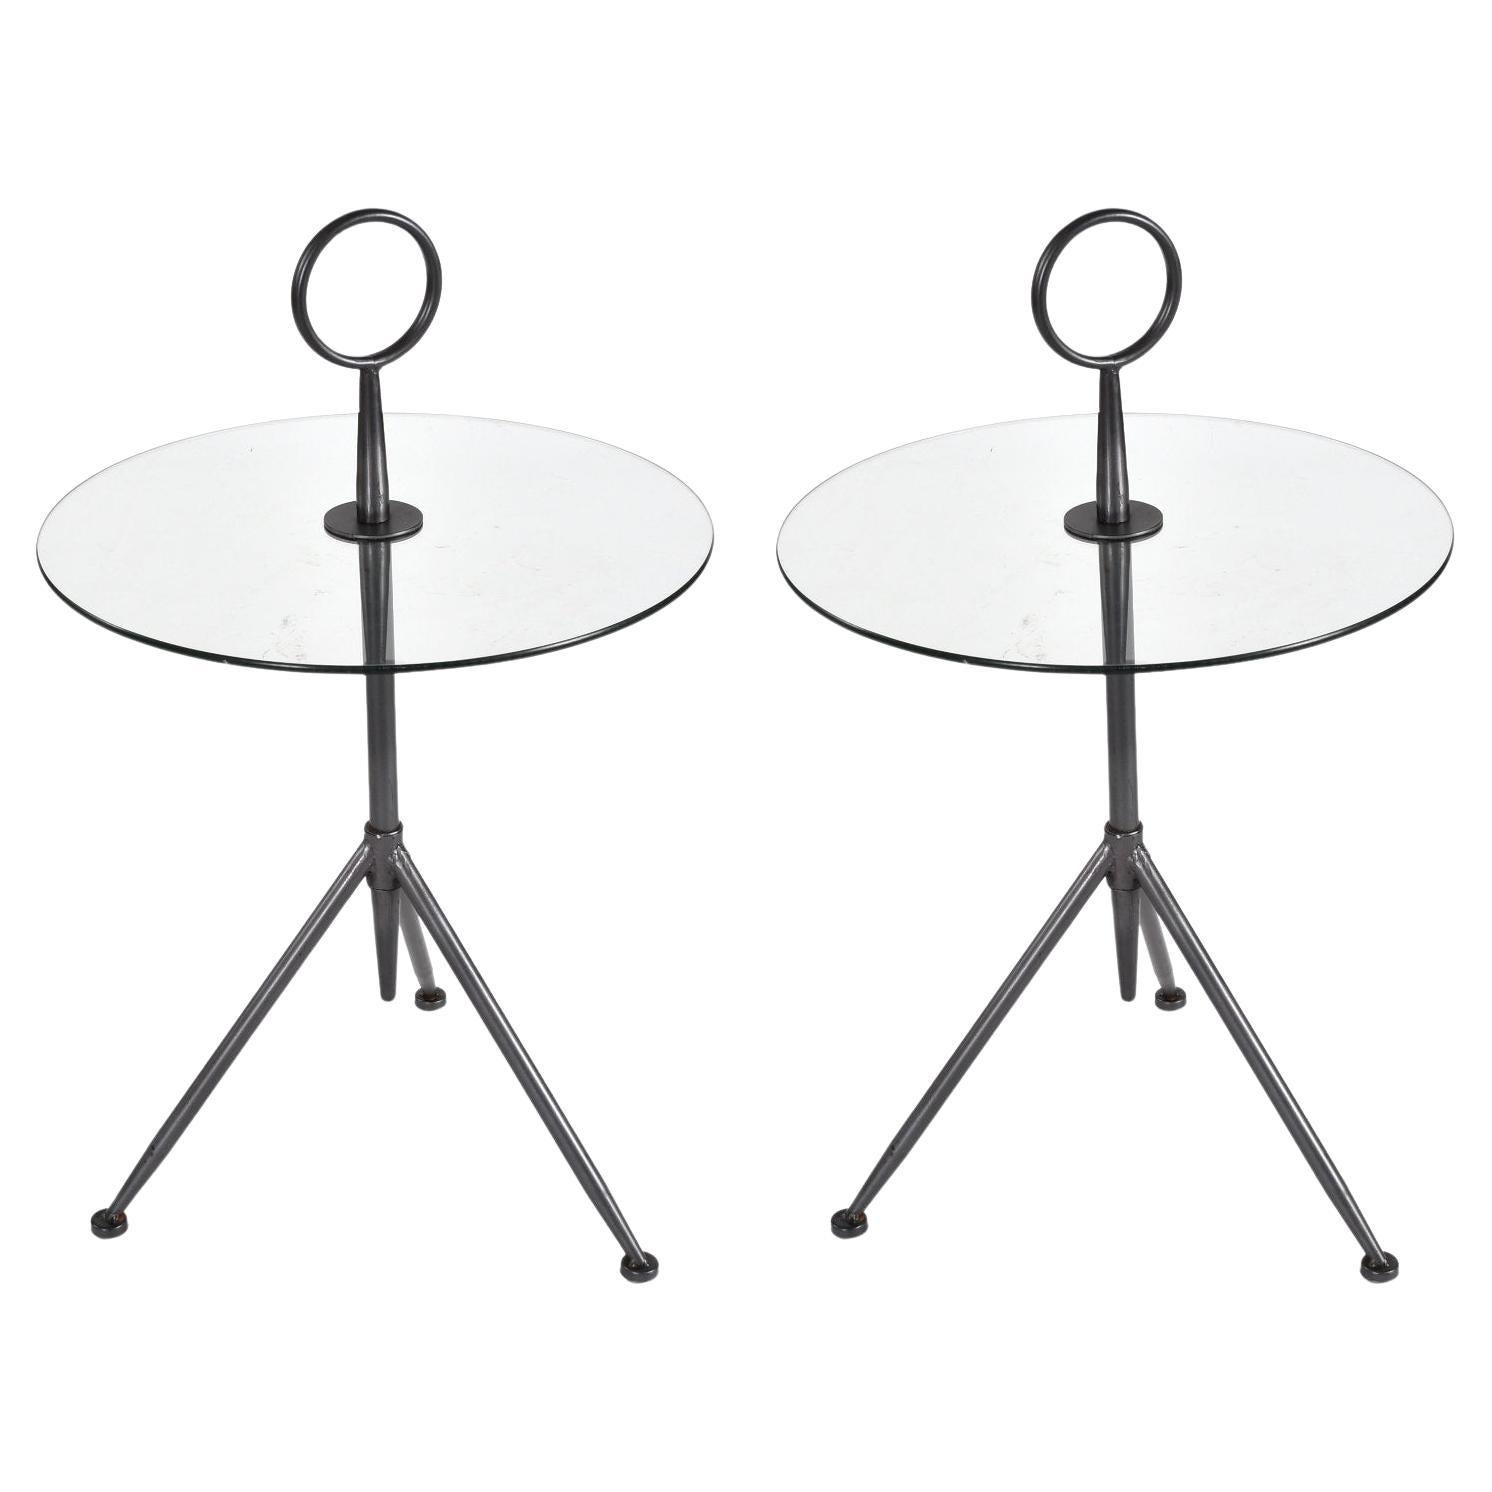 Pair of Italian Modern Round Glass Gueridon Side Tables with Tripod Steel Bases